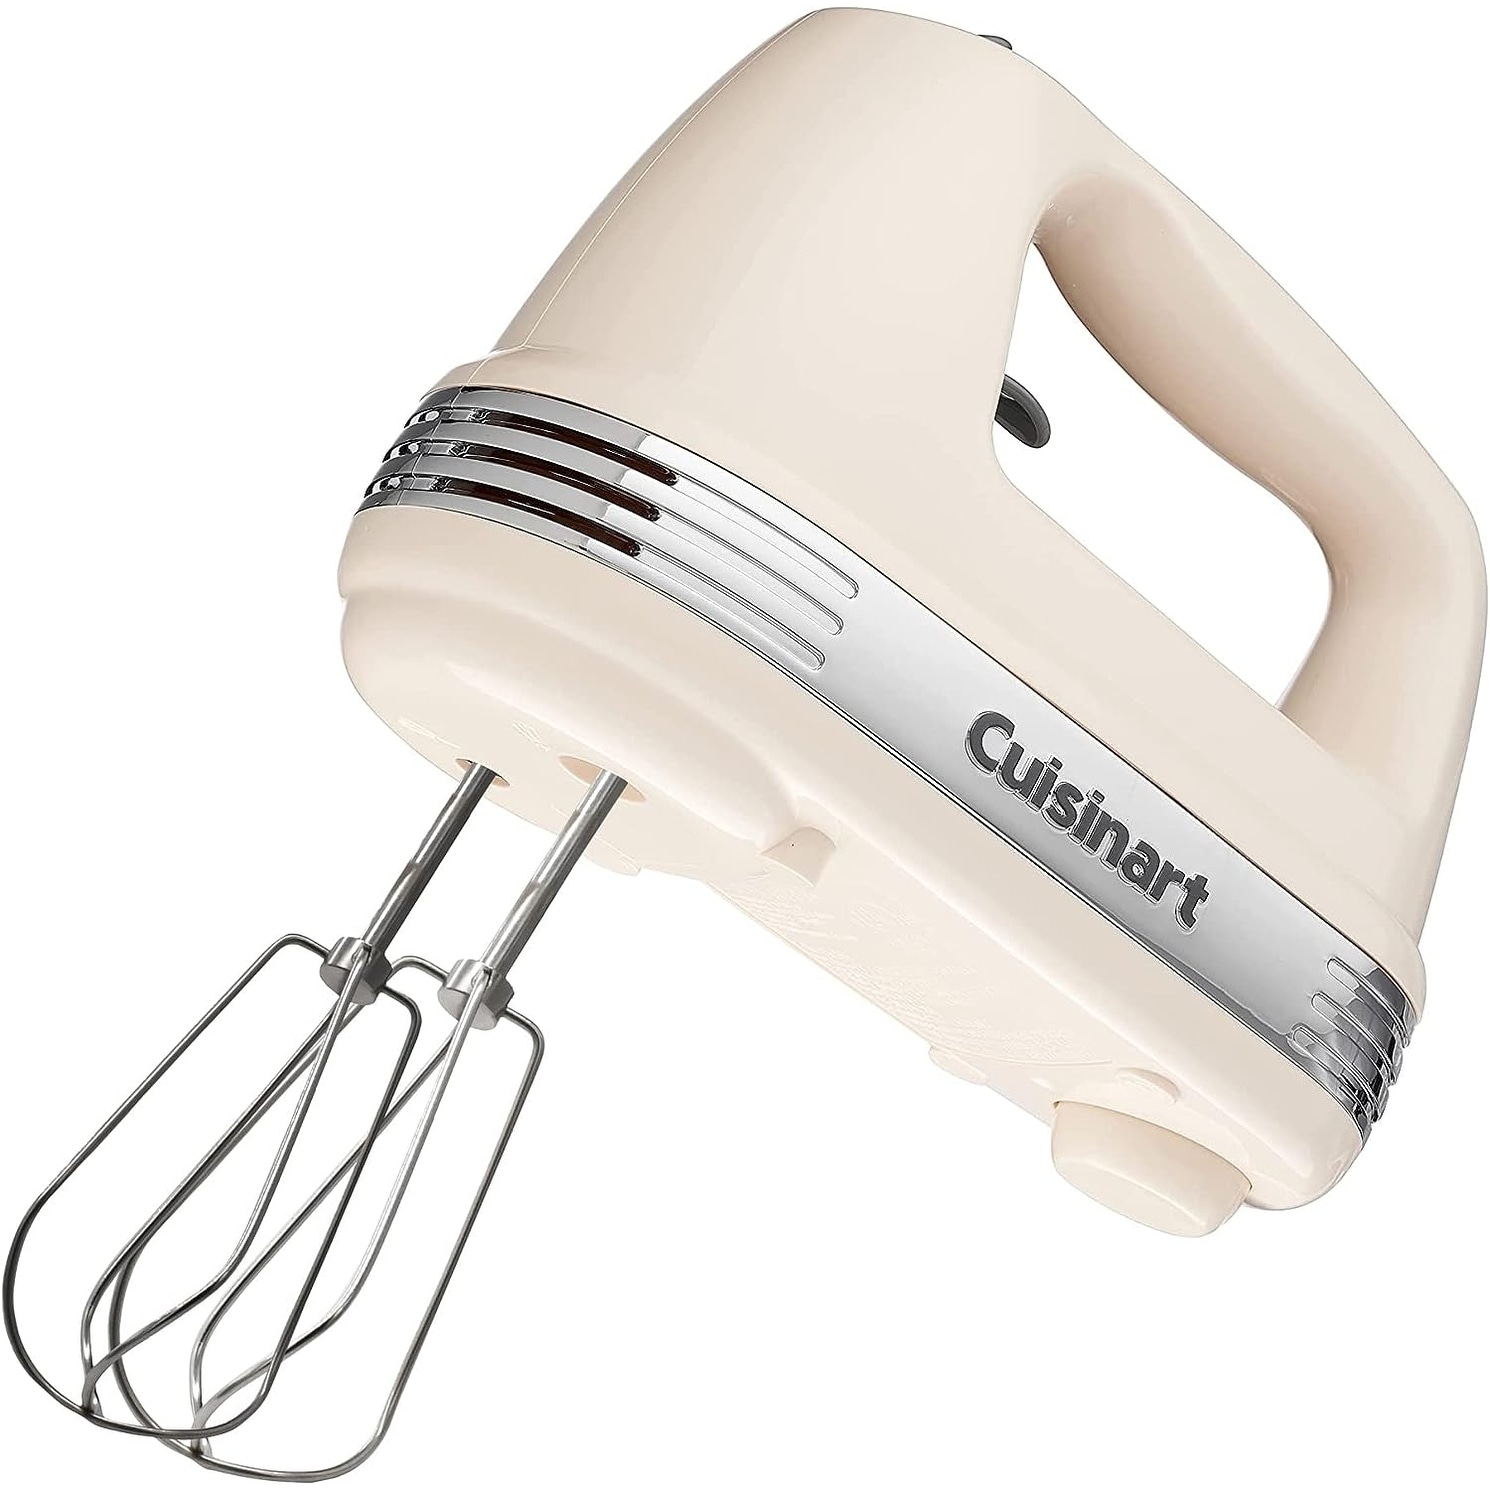 https://ak1.ostkcdn.com/images/products/is/images/direct/7cea4438e1303d558967a85bb5db0aaf1b41be14/Cuisinart-HM-90SCRM-Power-Advantage-Plus-9-Speed-Handheld-Mixer-with-Storage-Case%2C-Cream.jpg